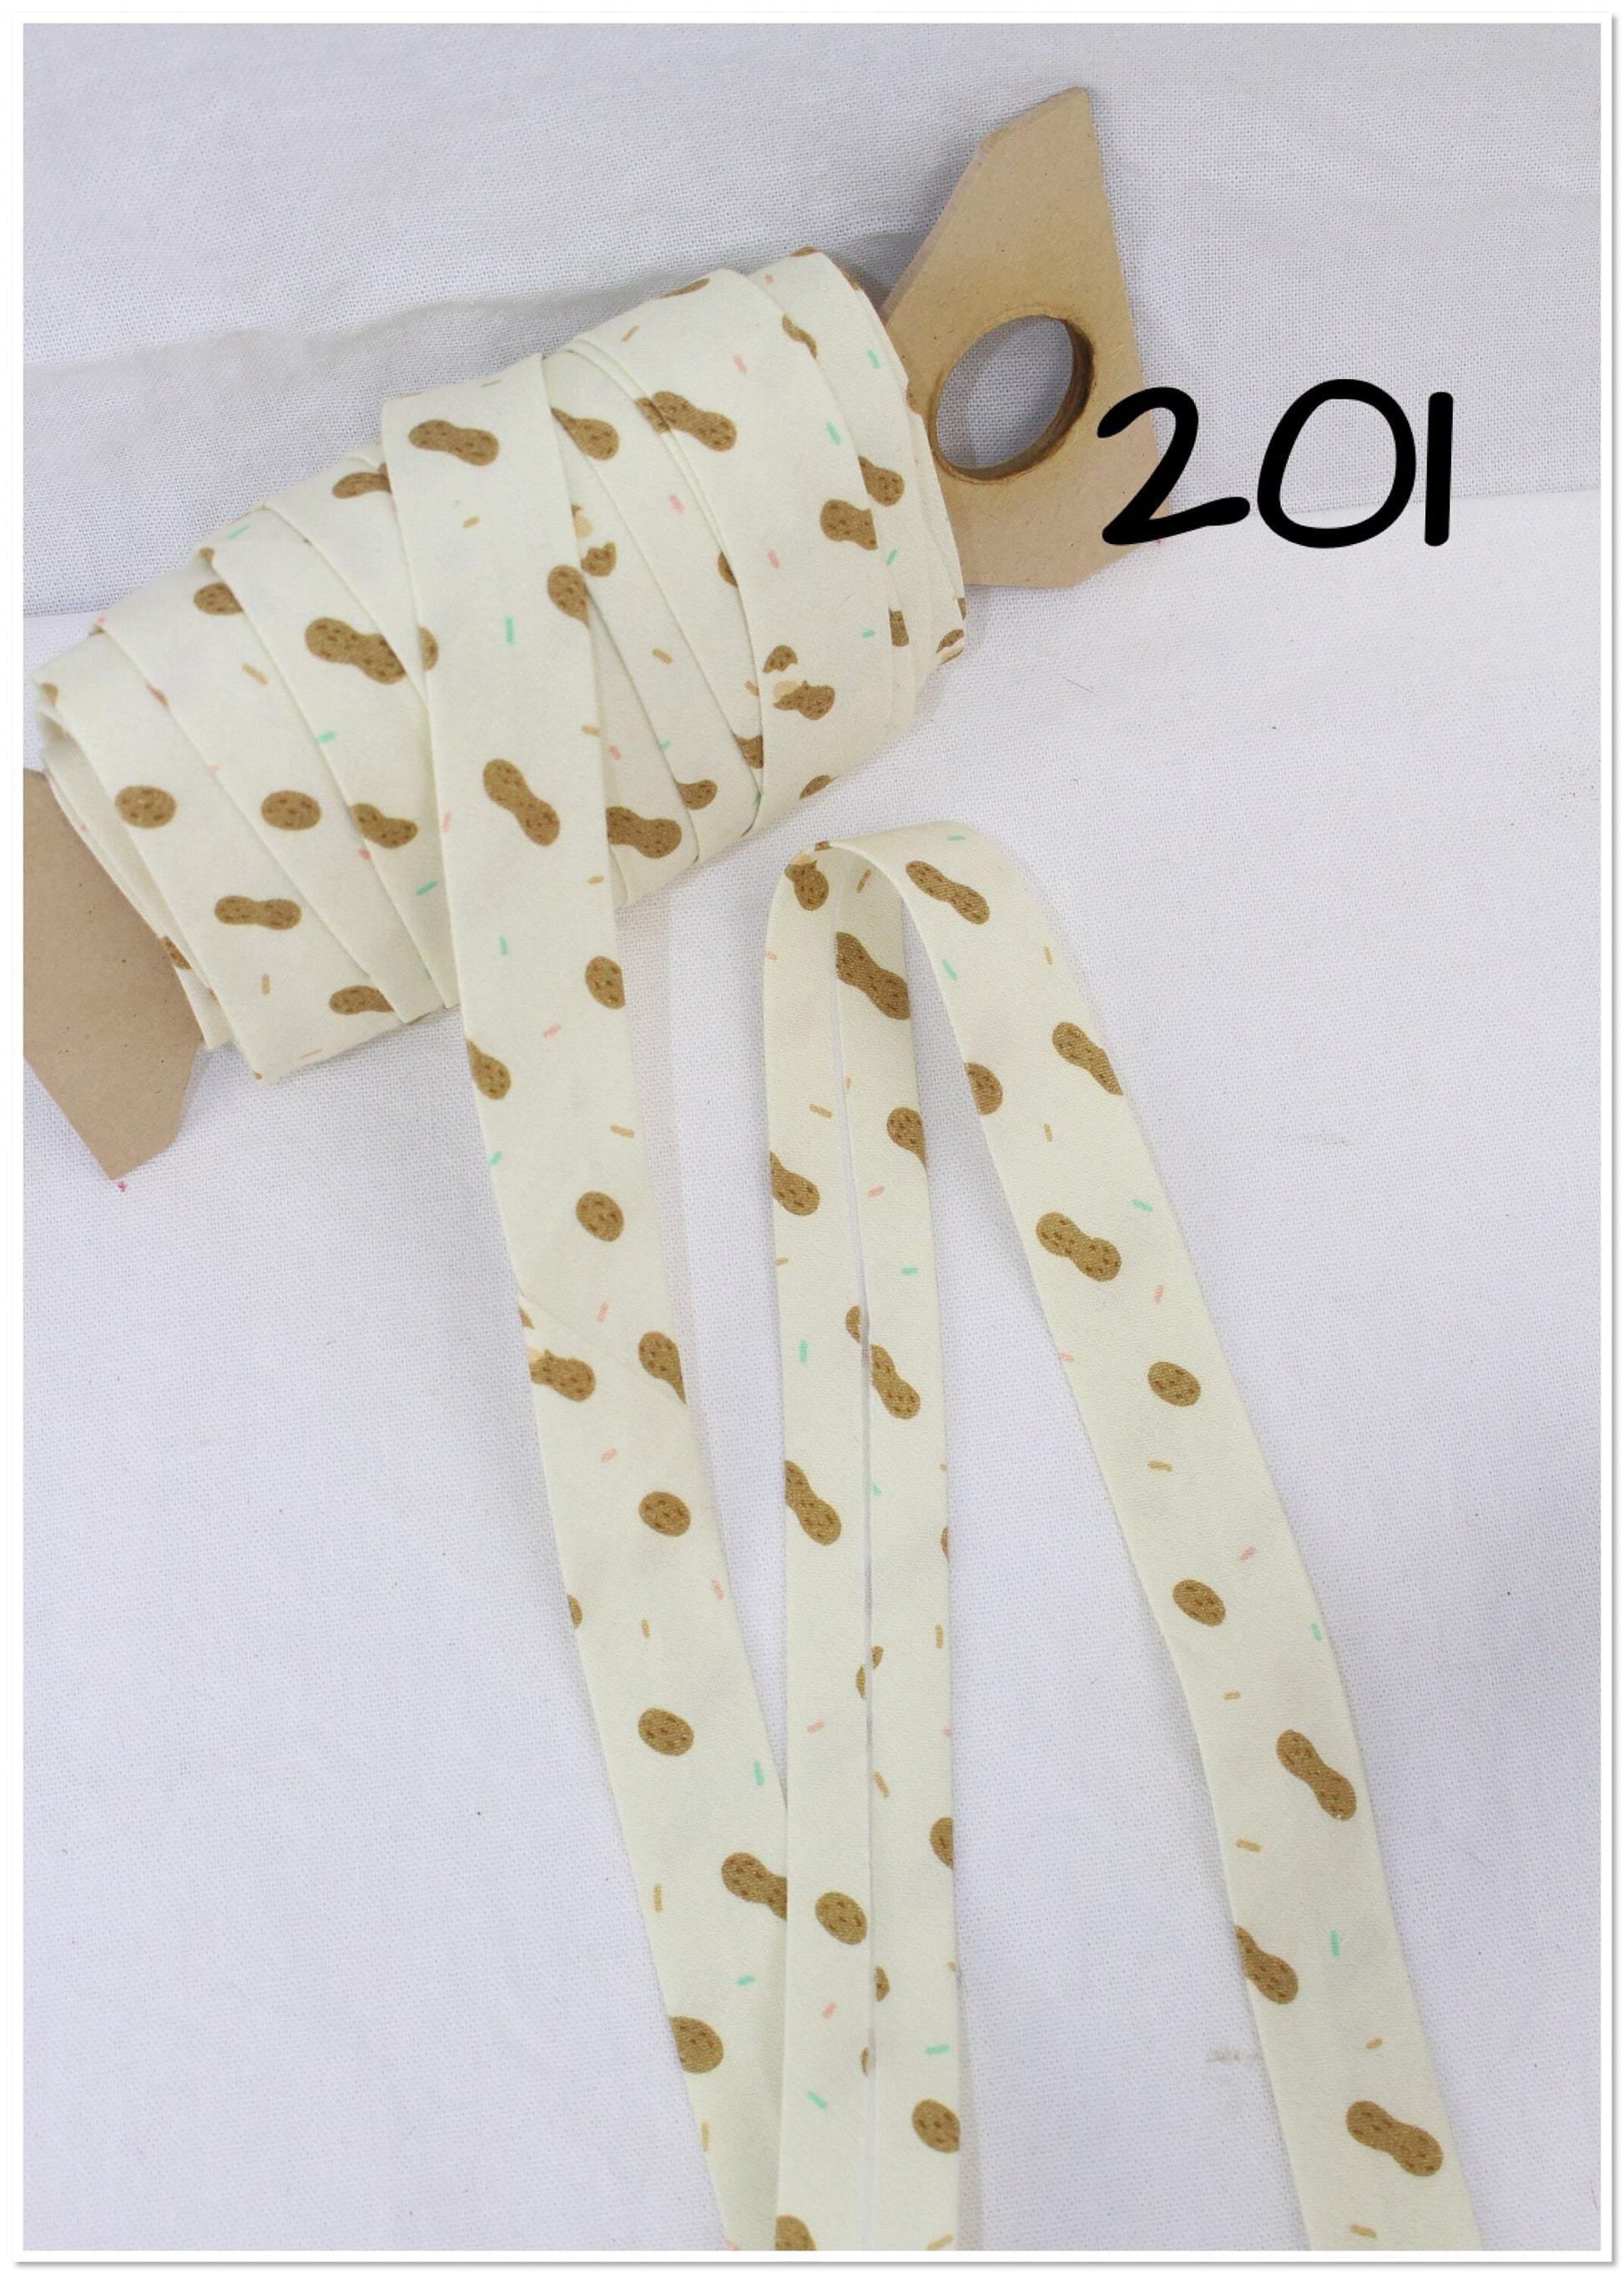 Bias Binding (Tape) 25mm, Cotton, Single Fold, peanuts, animal print, crosses, triangles. Fusible iron on available.